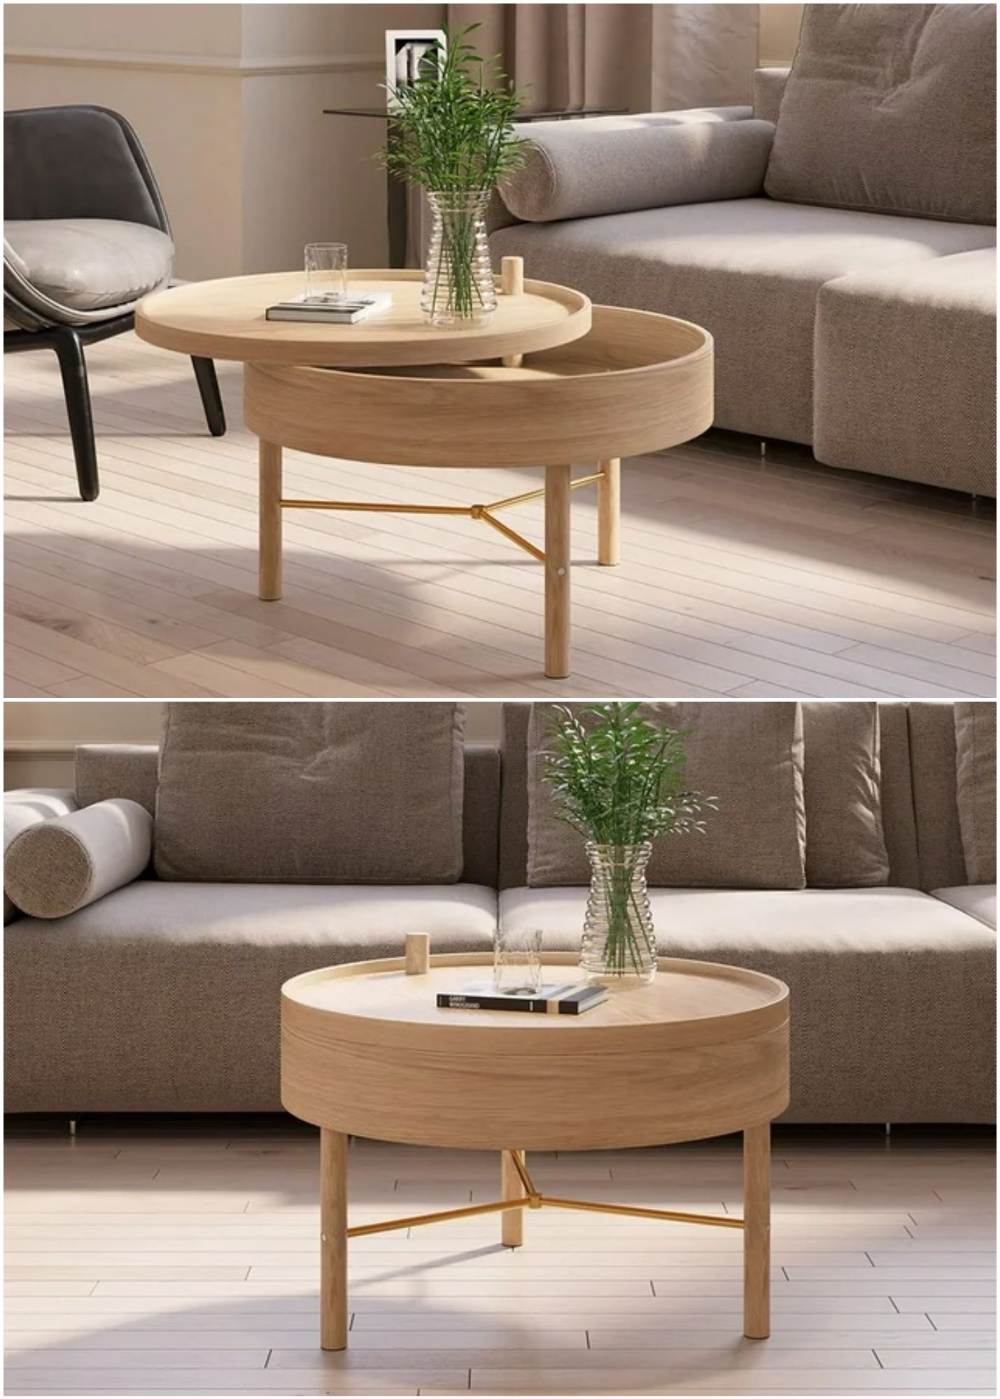 The Ultimate Space-Saving Solution: Round Coffee Tables with Storage